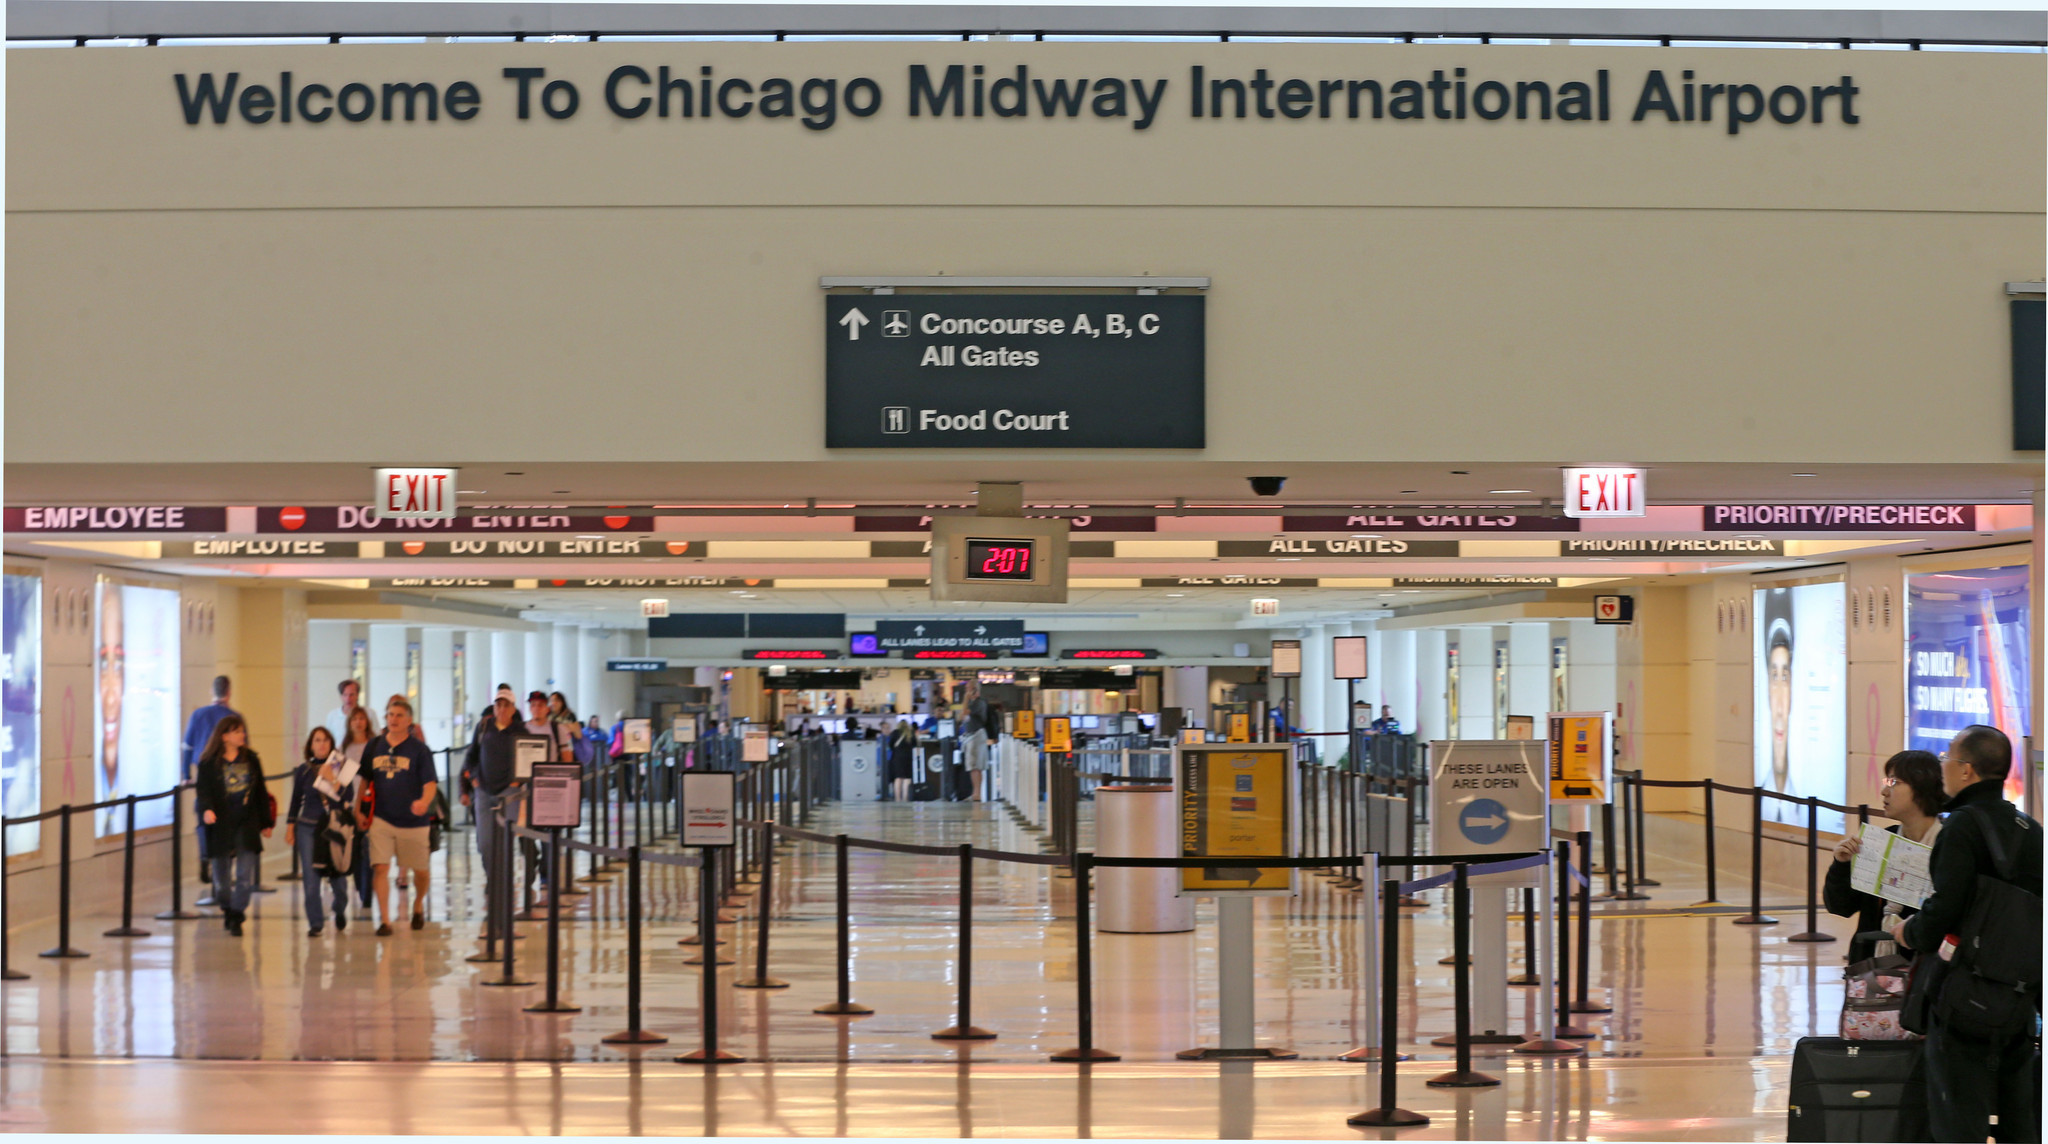 LIMITED ACCESS WILL BE PROVIDED INSIDE O'HARE OR MIDWAY INTERNATIONAL AIRPORTS